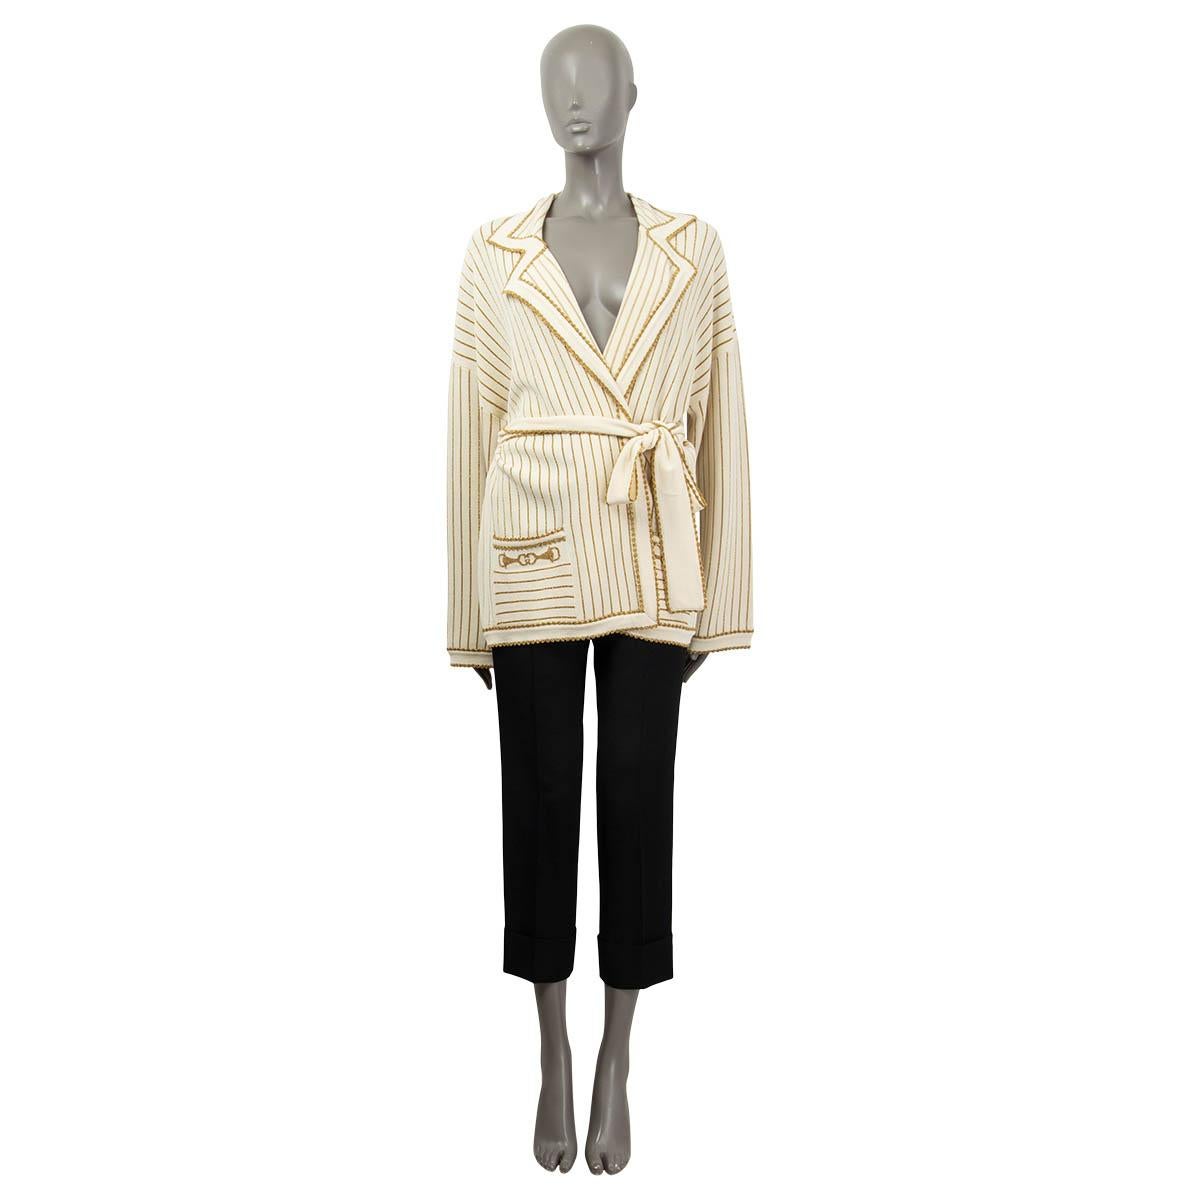 100% authentic Gucci Resort 2020 cardigan in cream wool (92%), metallized fiber (5%) and polyamide (3%). Features gold lurex stripes and edges, notched lapels and a belted waist. Has the horsebit intarsia on the two patch pockets on the front and